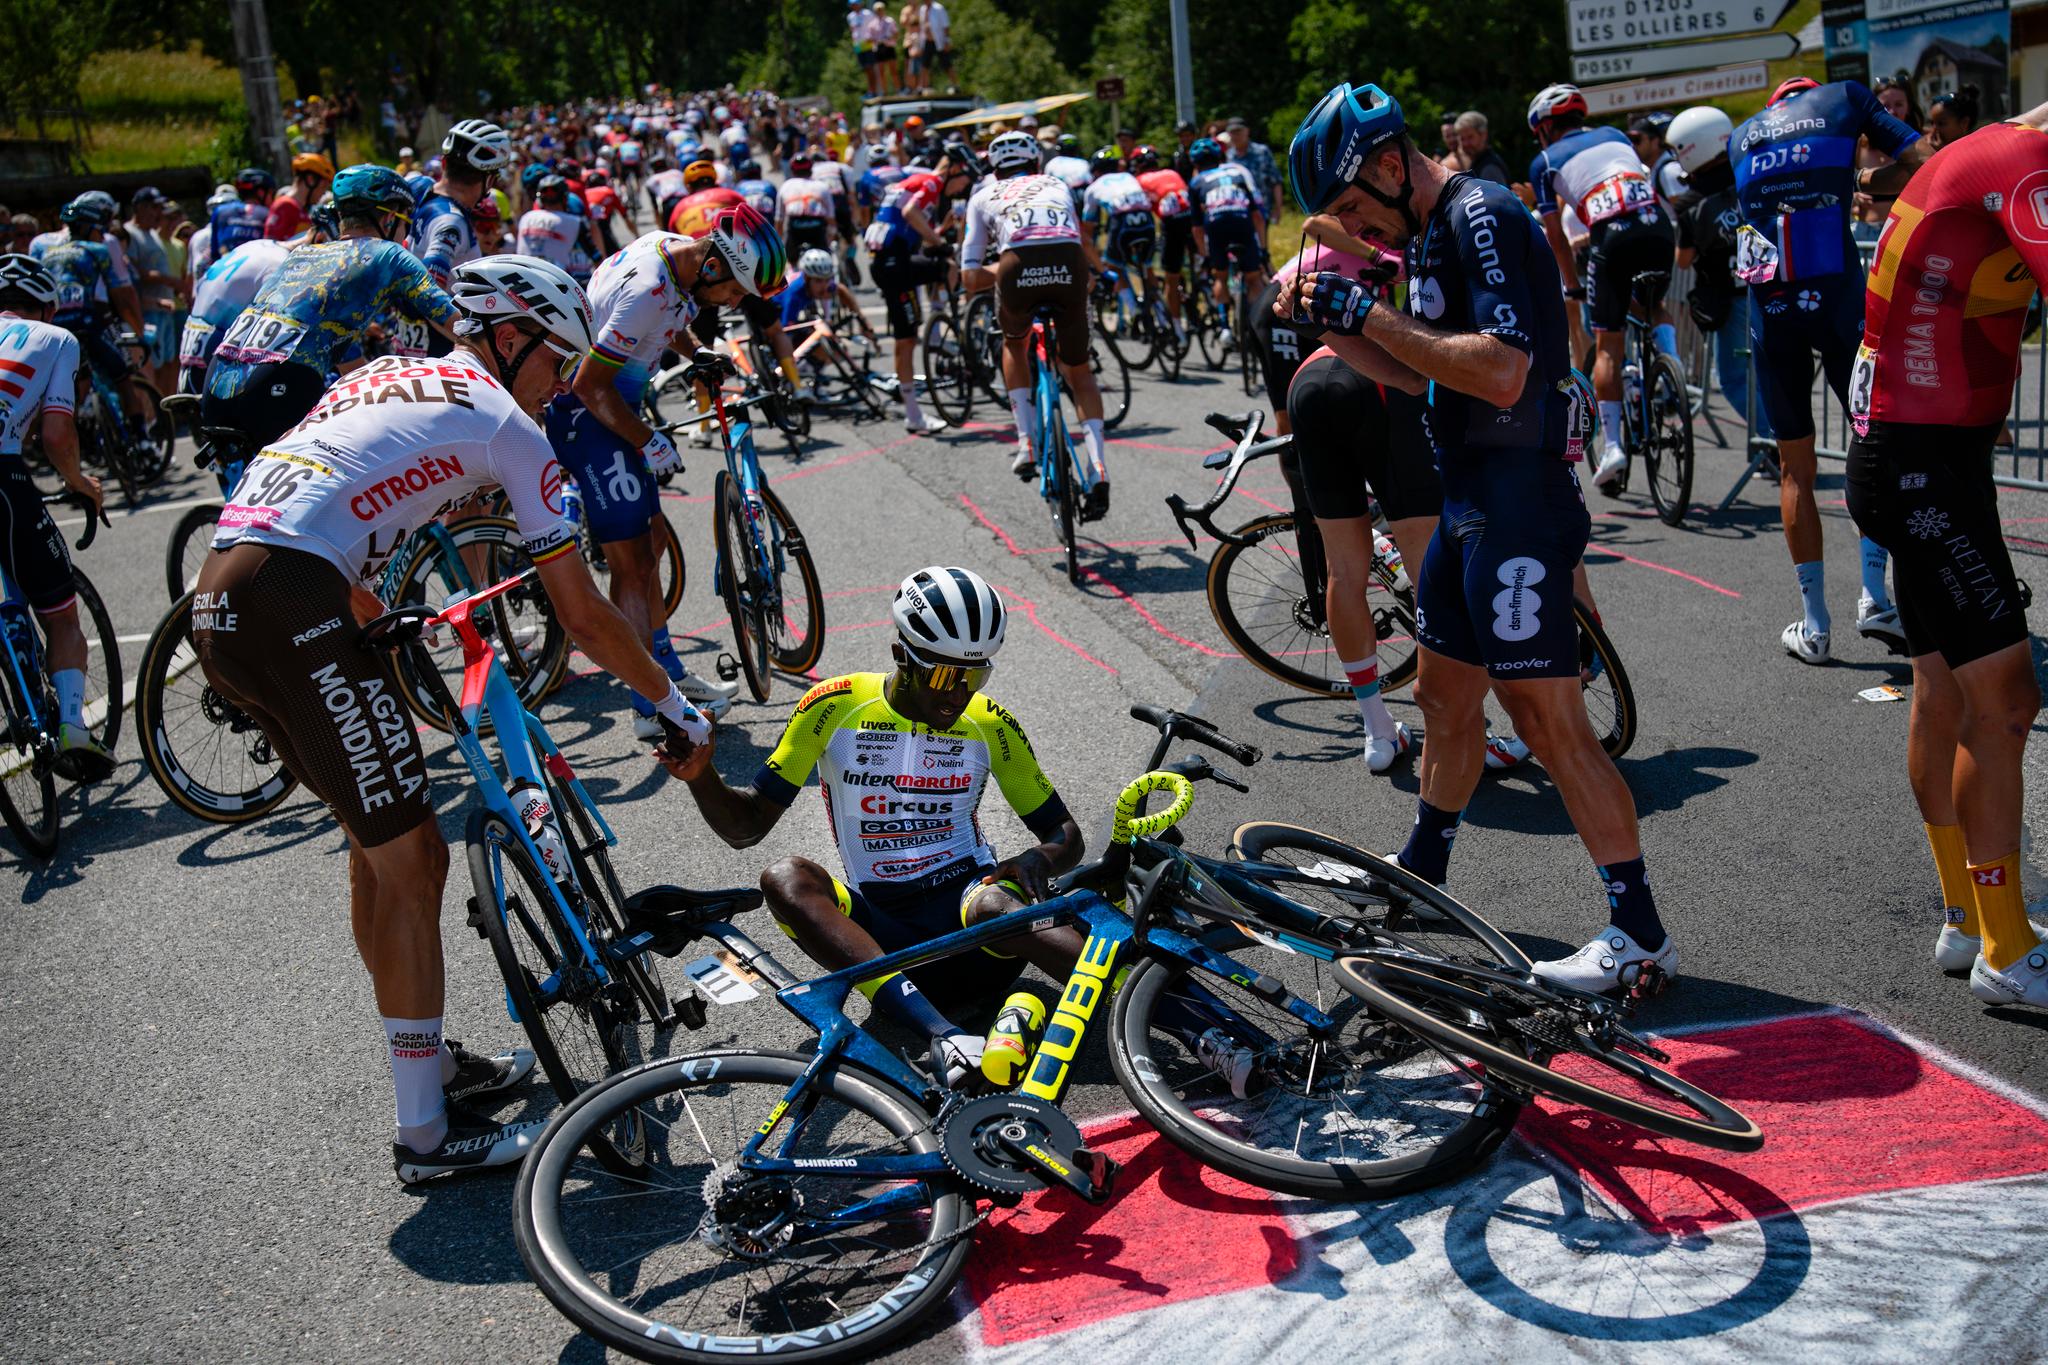 The scenes caused a new mass riot in the Tour de France: – Please